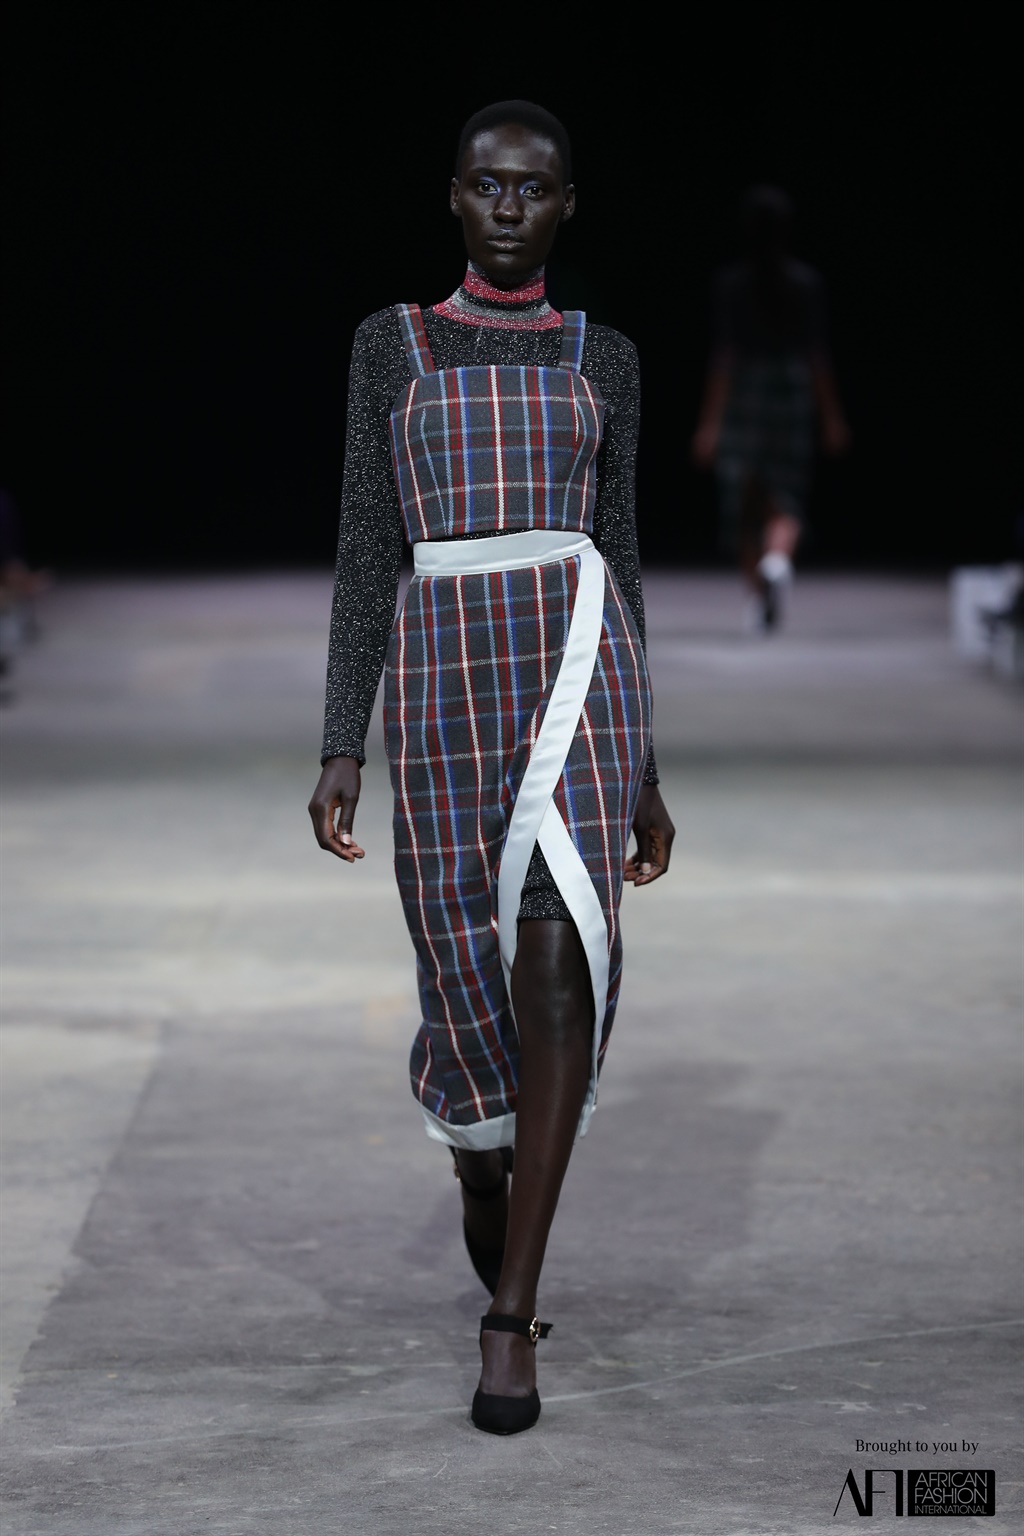 Cape Town Fashion Week just gave us the message that 'Africa is now ...